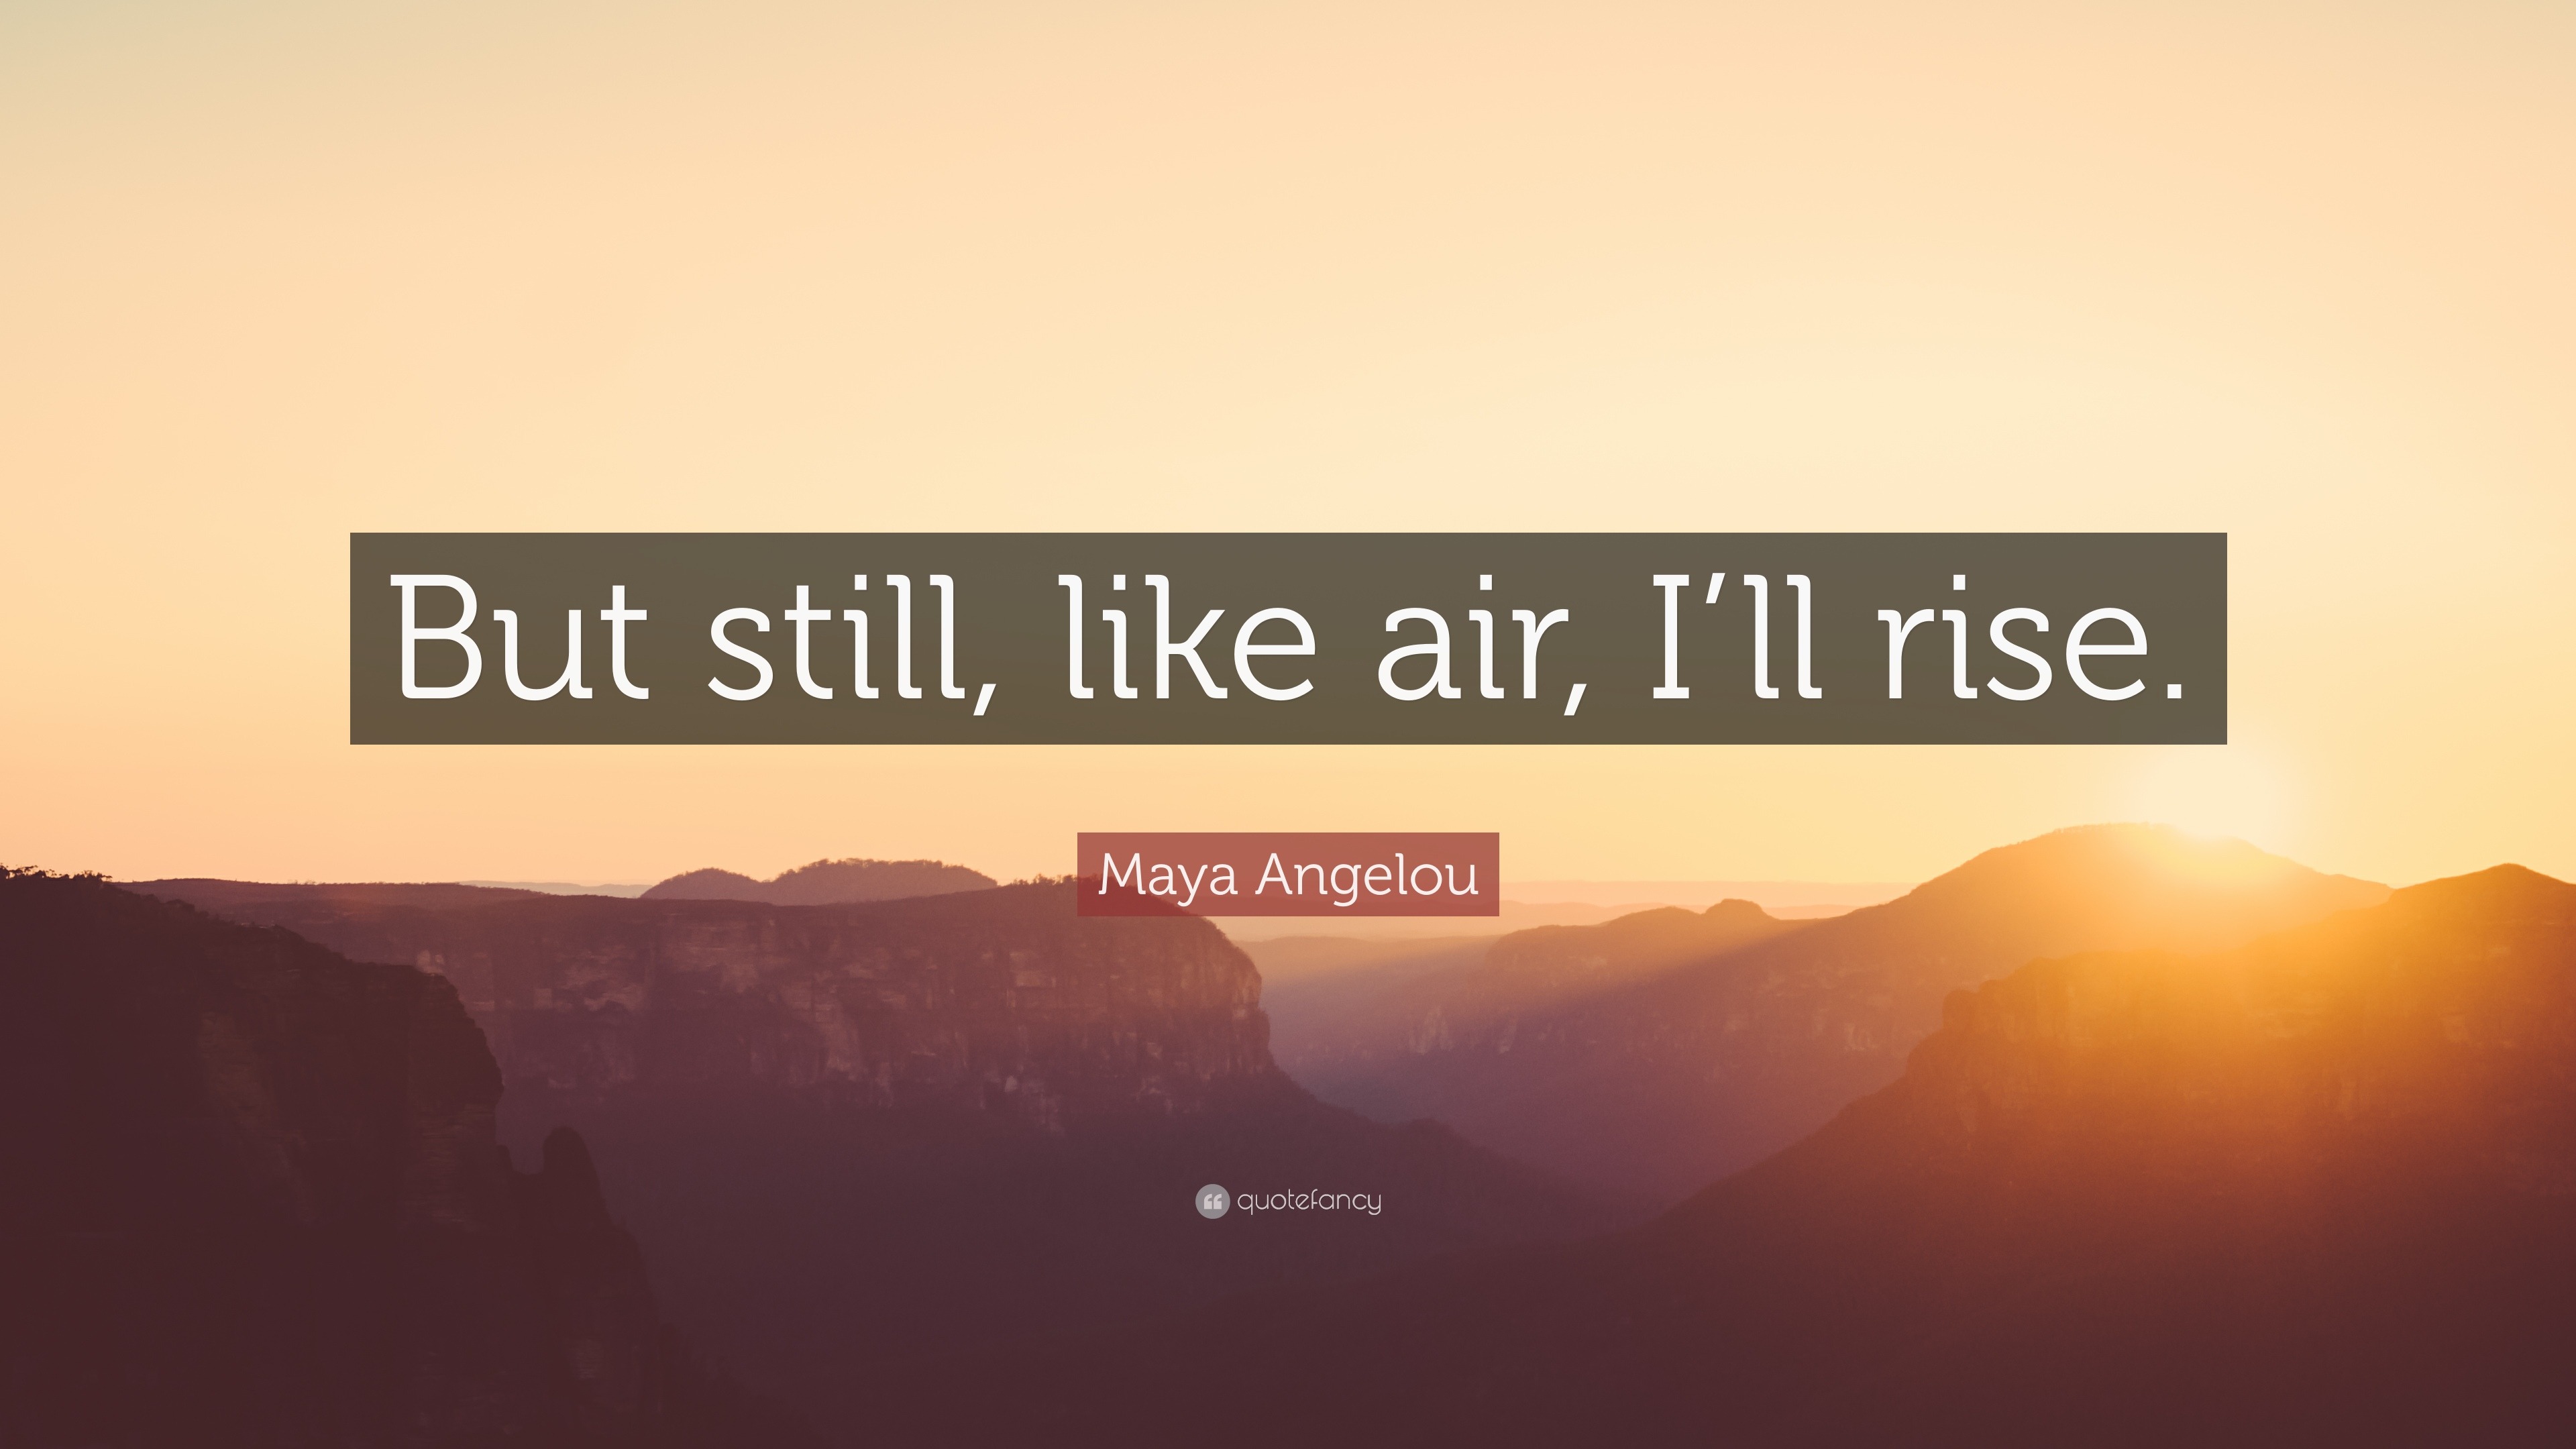 Maya Angelou Quote: “But still, like air, I'll rise.”